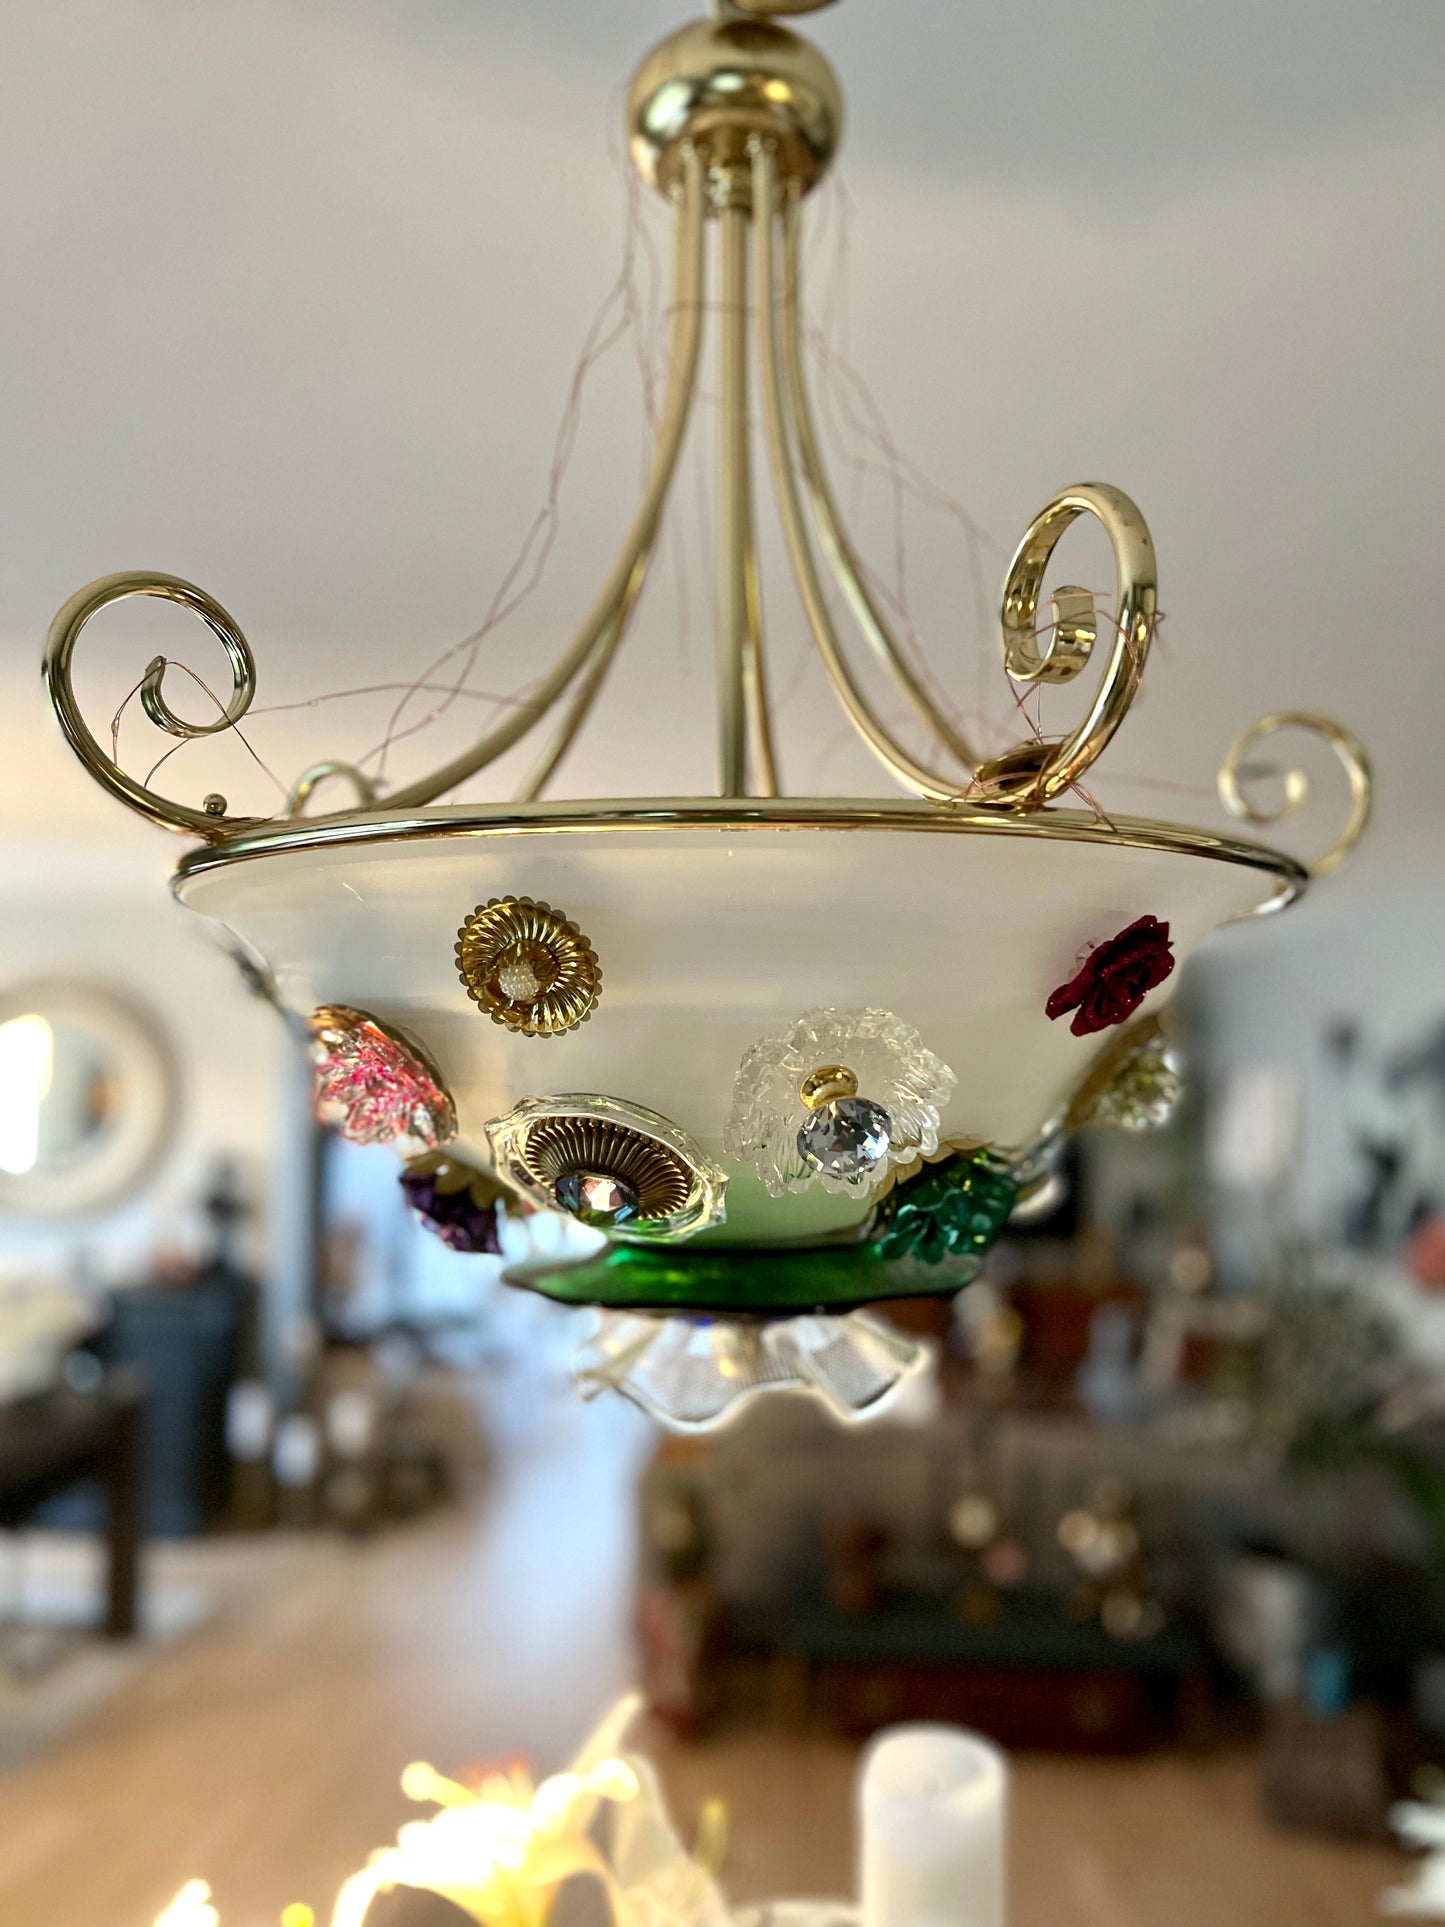 Chandelier with glass flowers